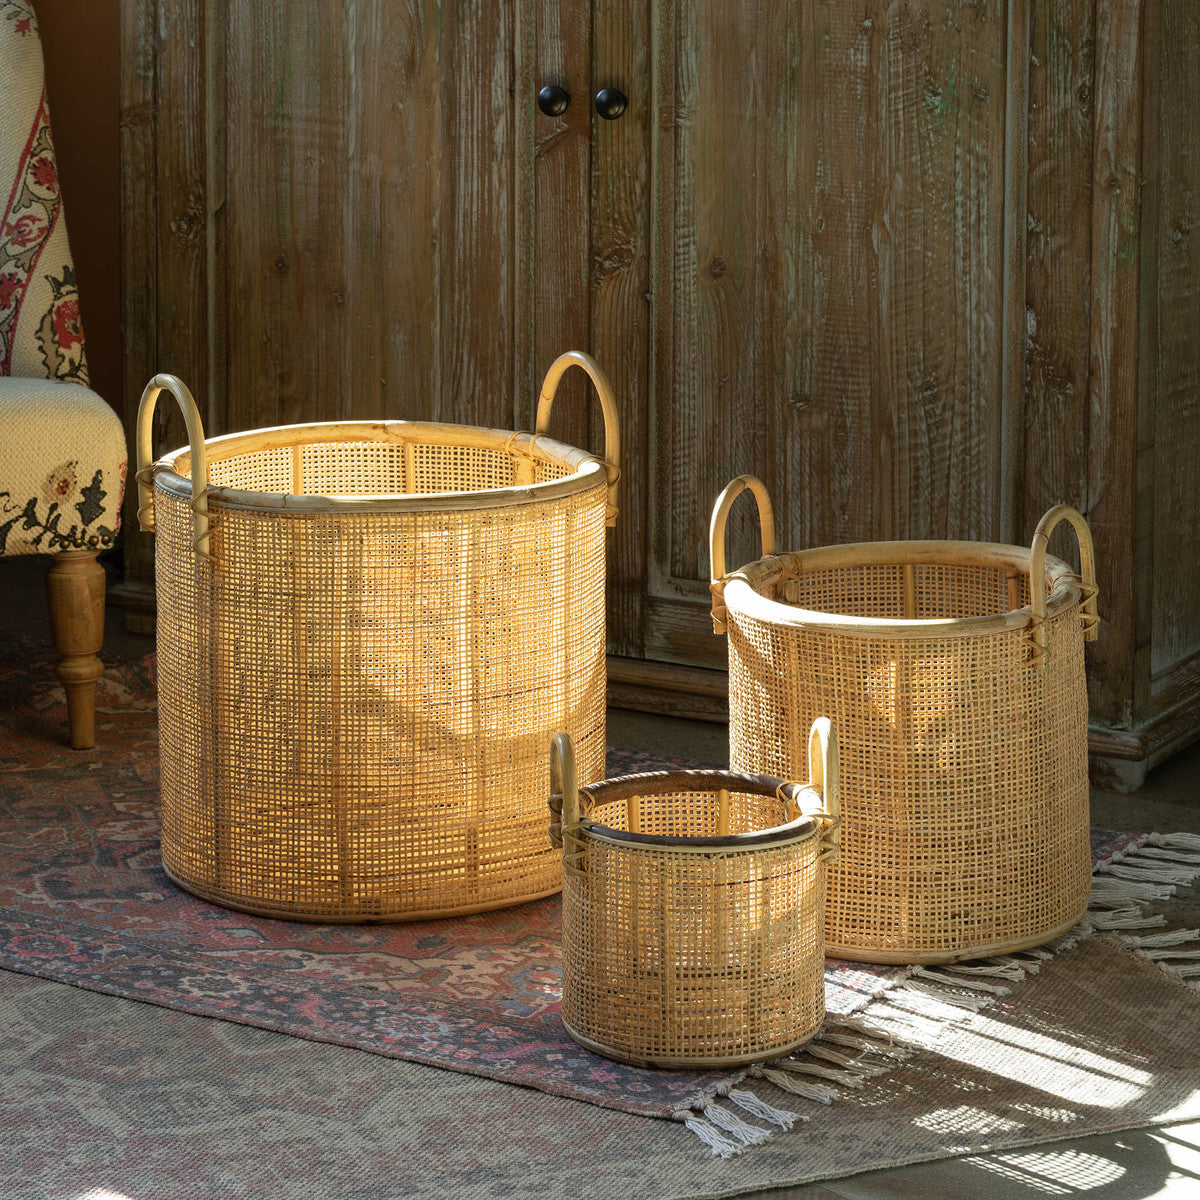 Woven Rattan Baskets with Handles, Set of 3- Online Only